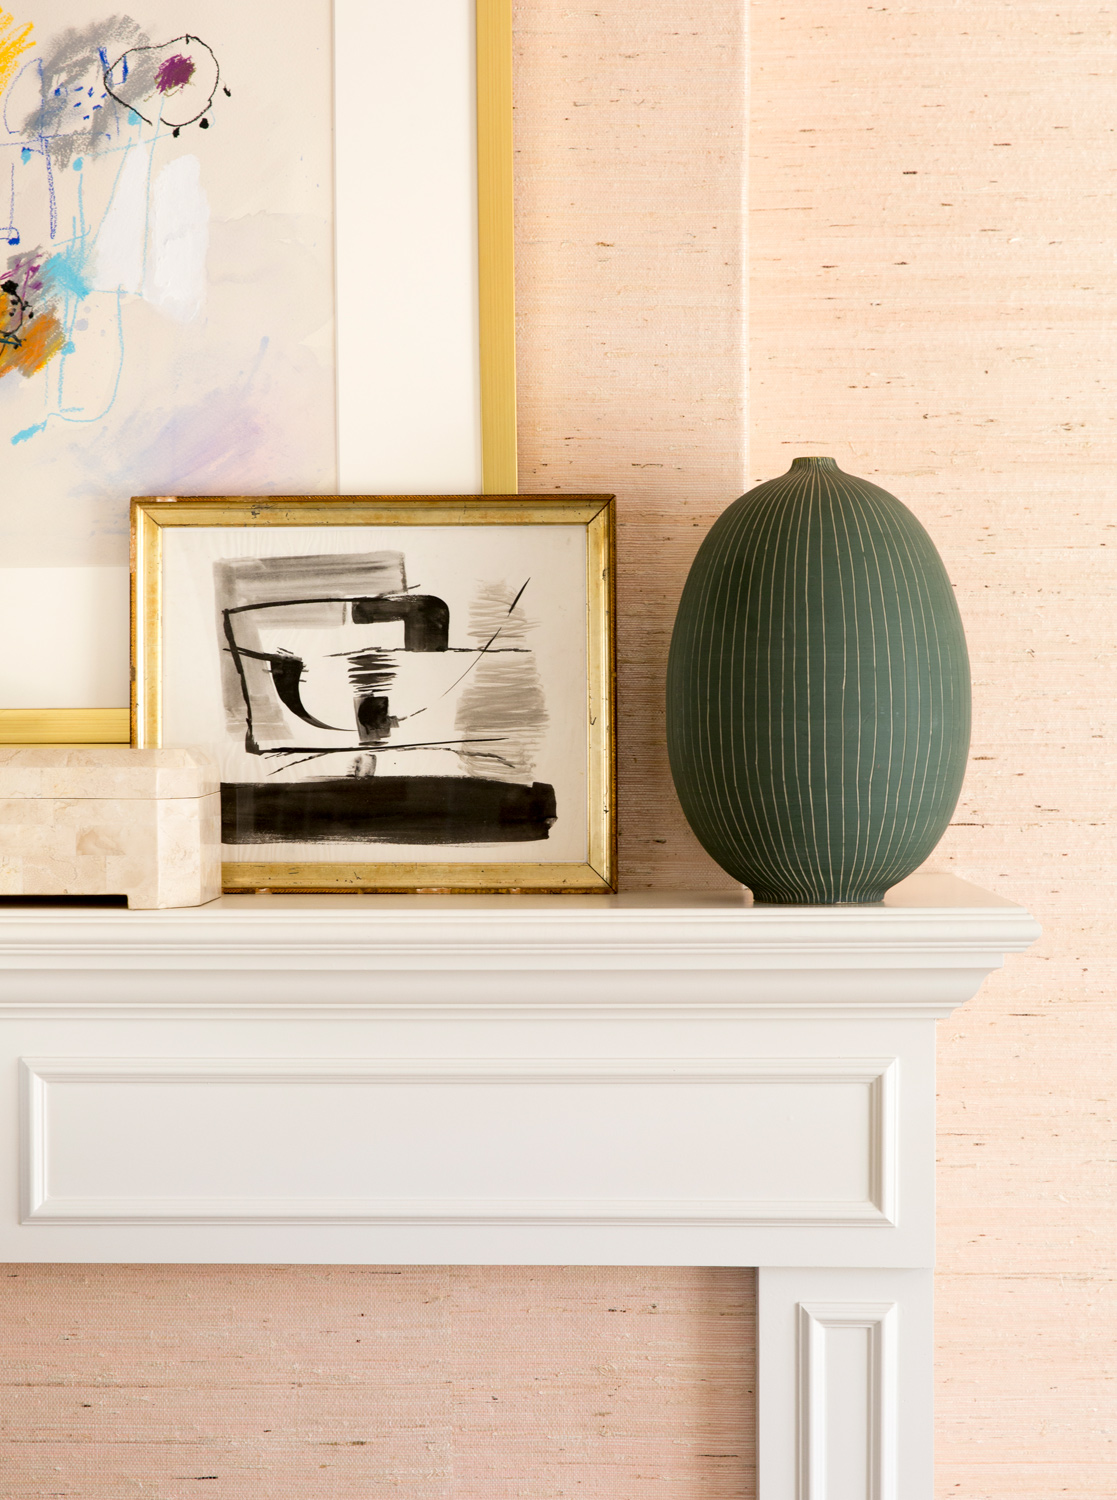 Art mantle by interior photographer Buff Strickland